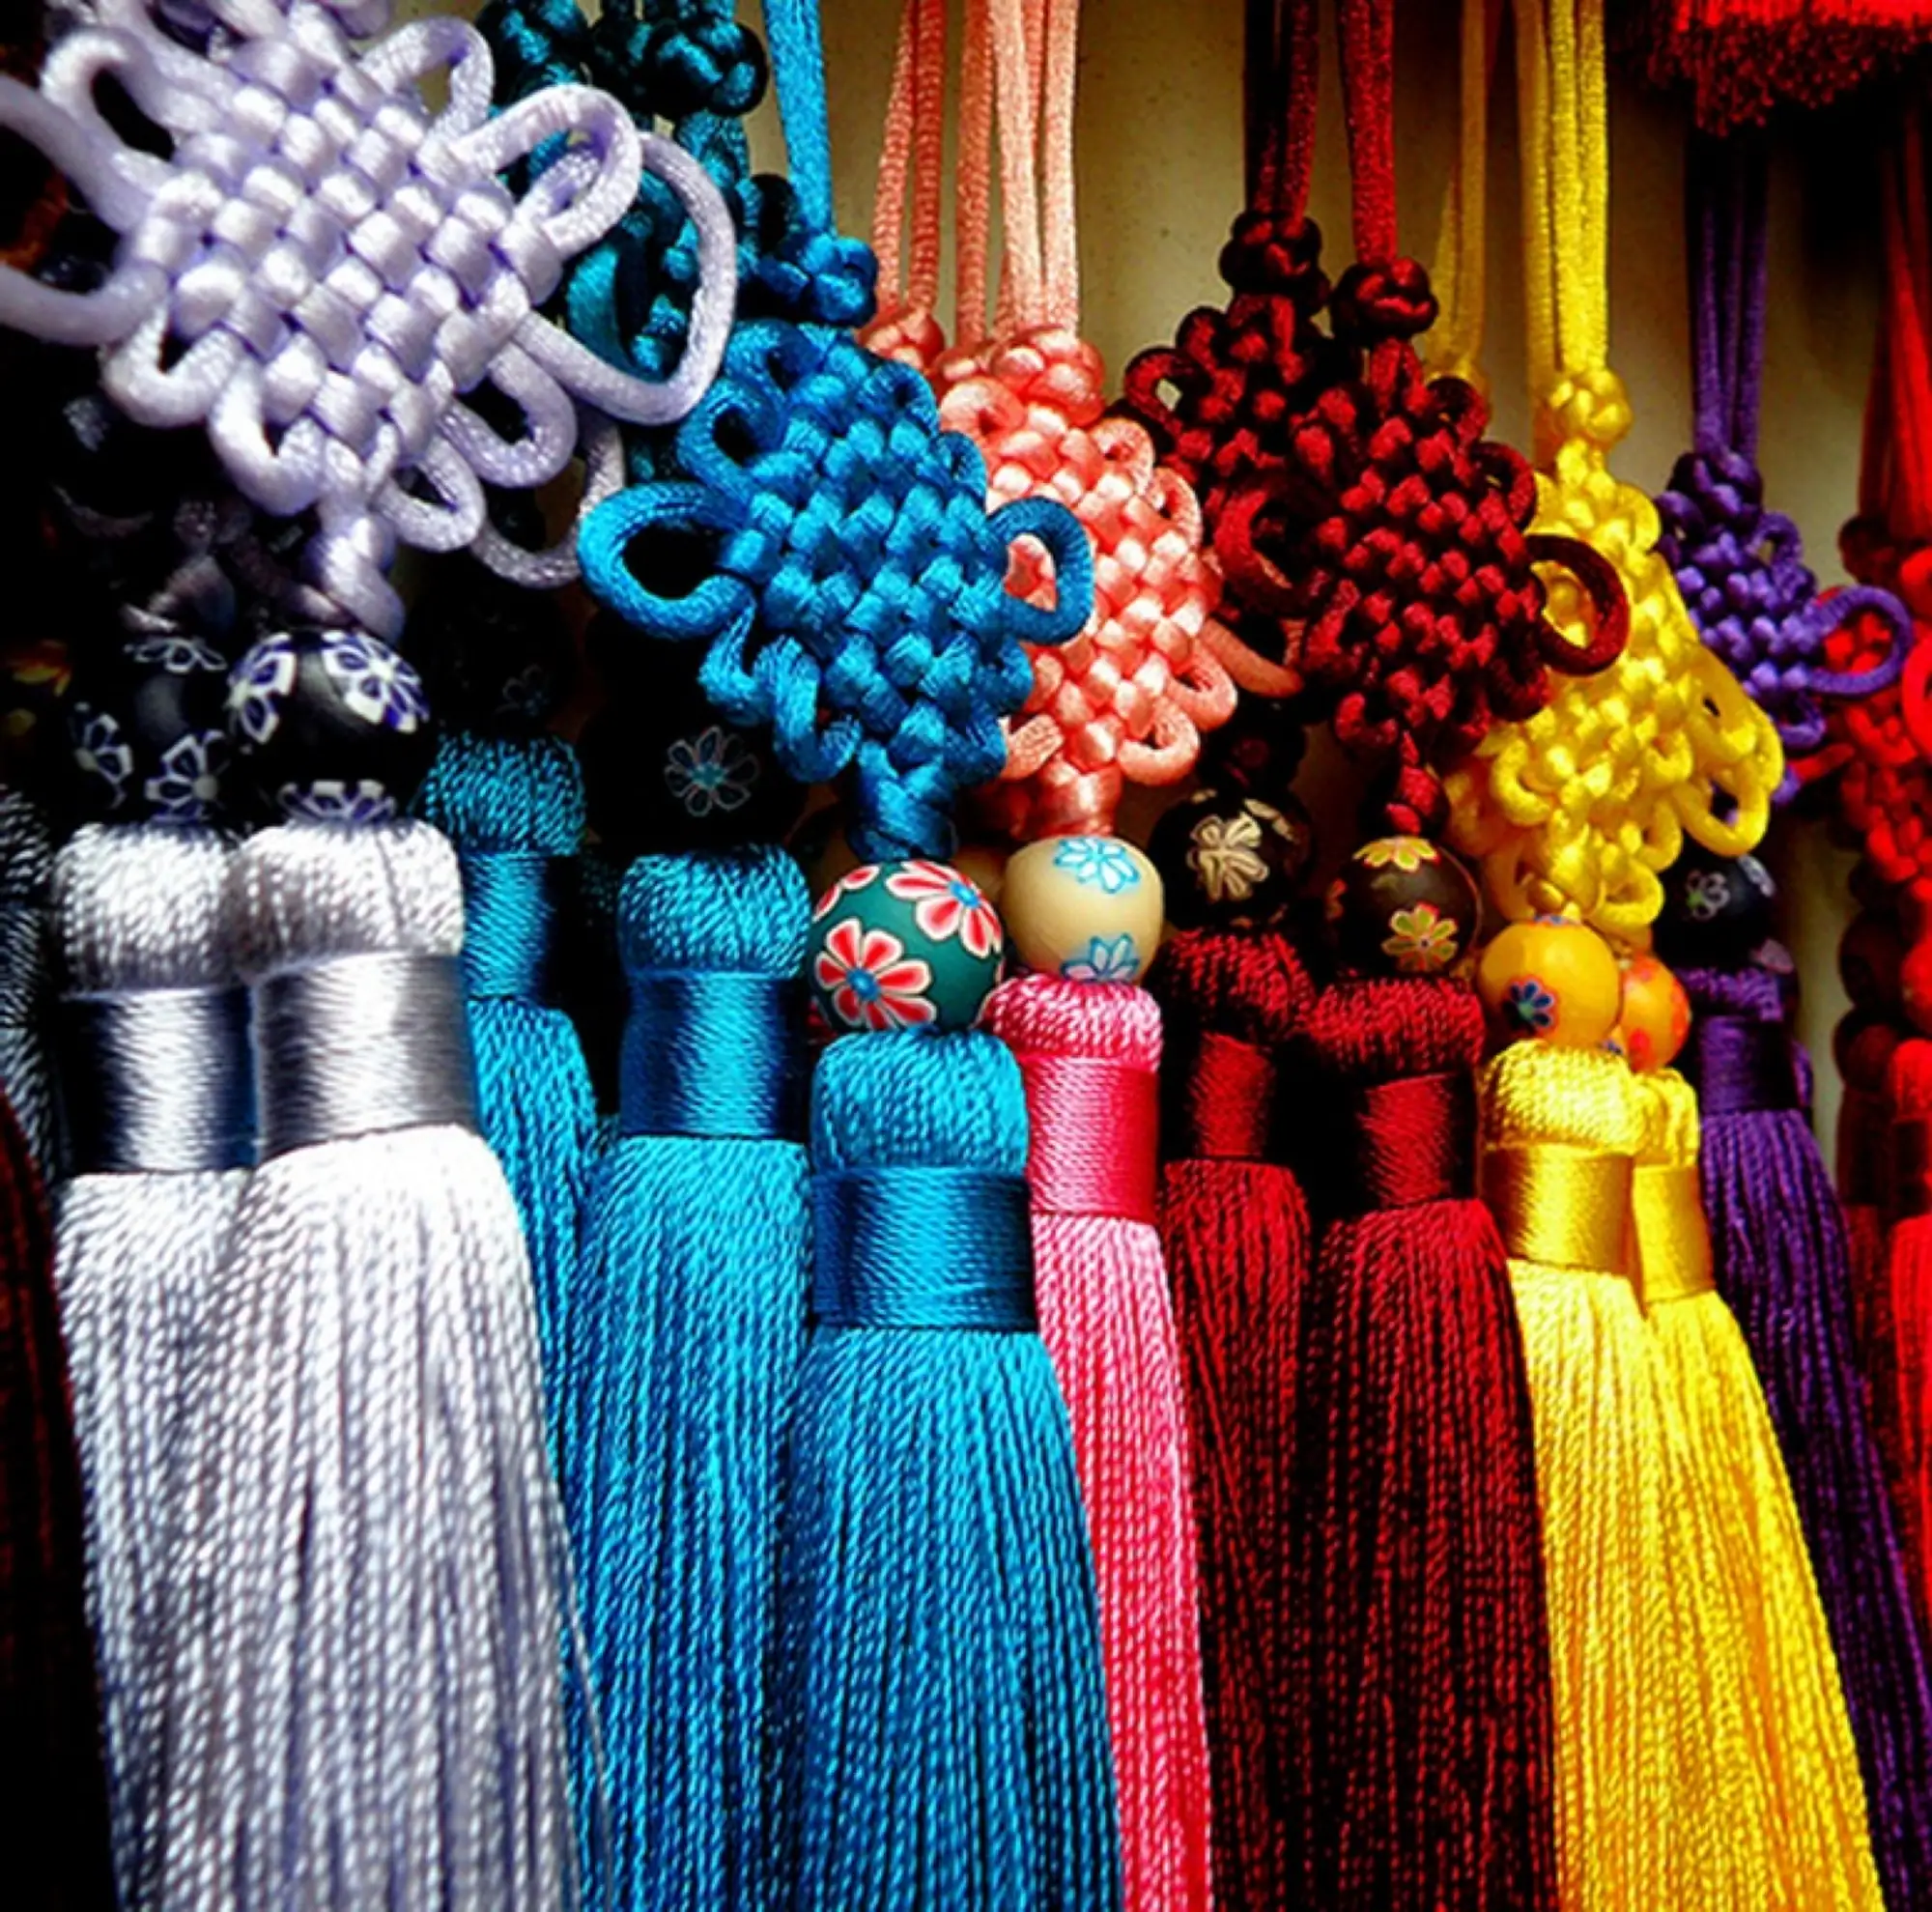 7-traditional-chinese-knotting